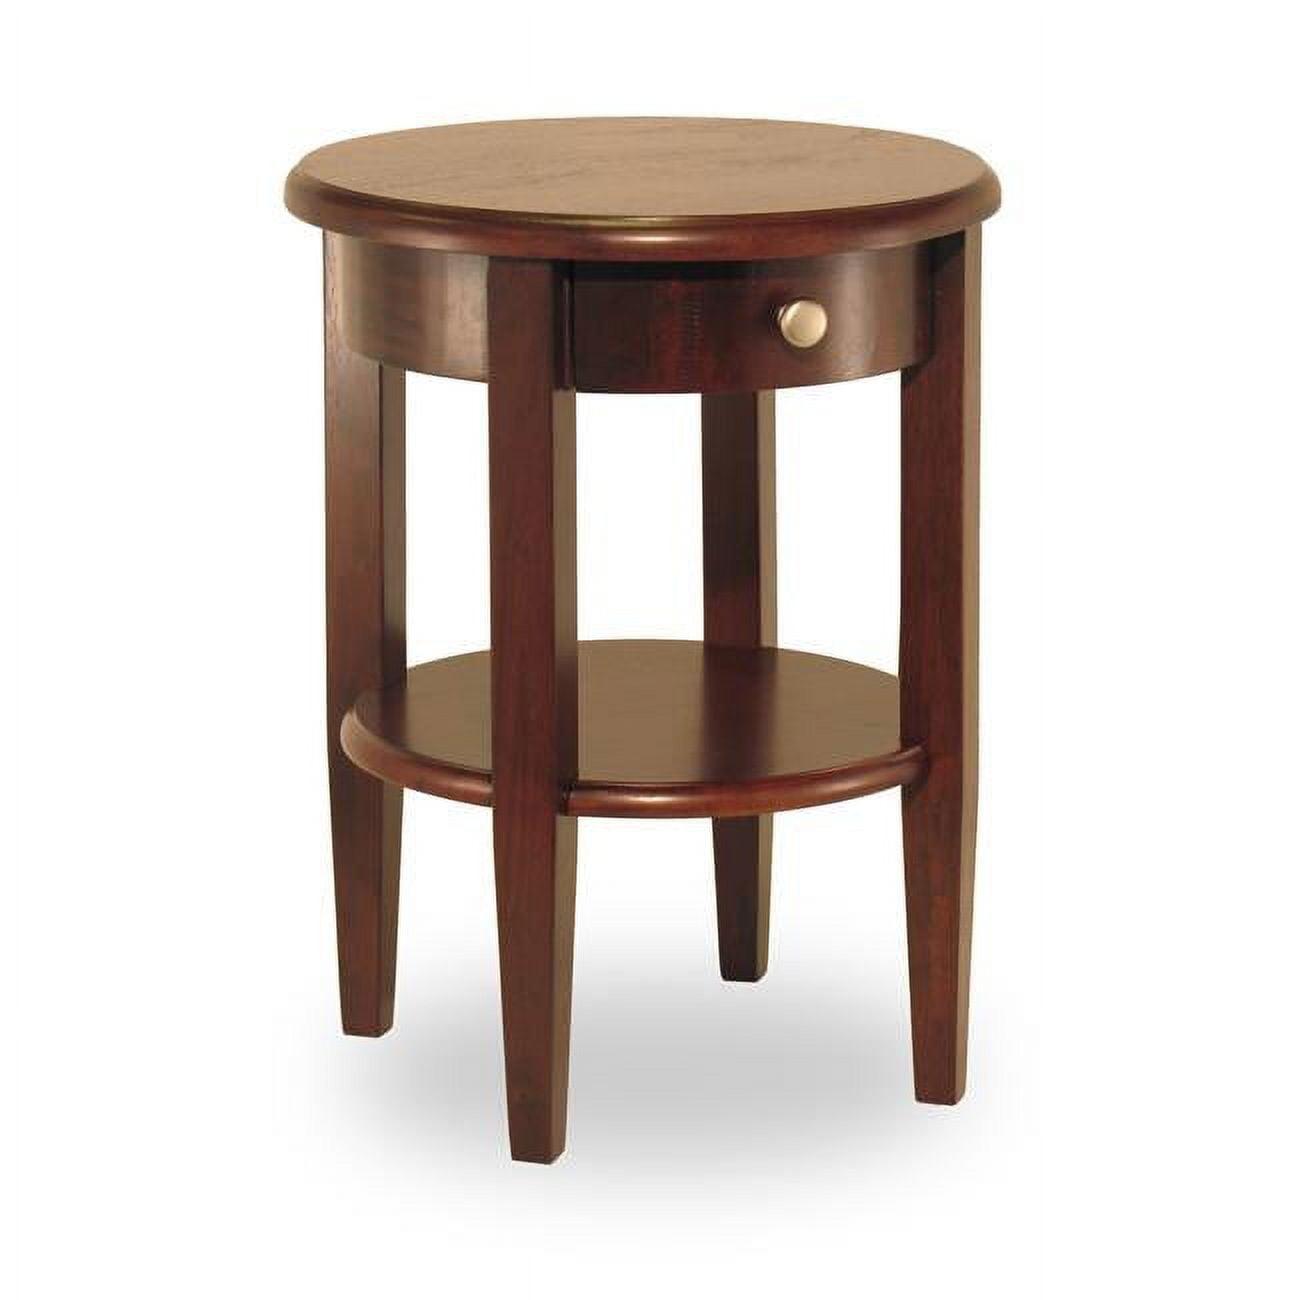 Transitional Walnut Wood Round End Table with Storage